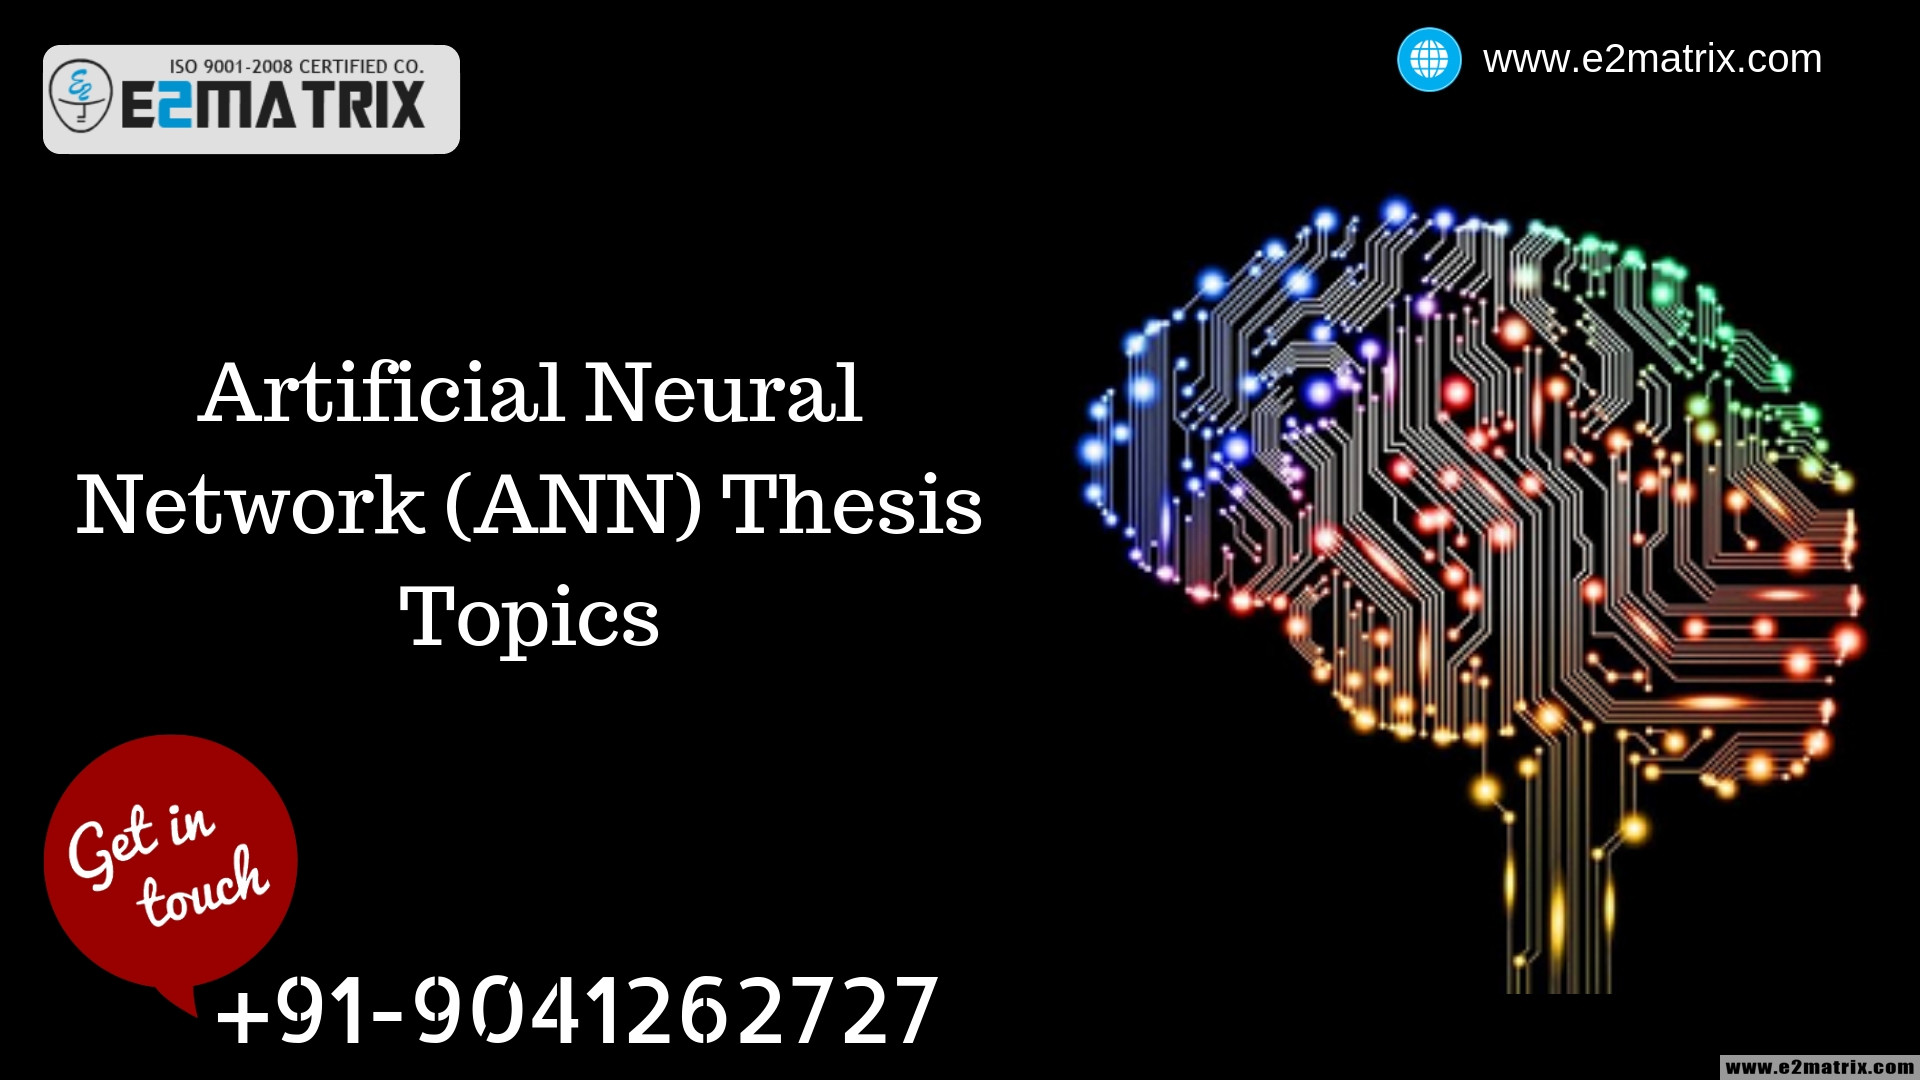 Artificial Neural Network (ANN) Thesis topics, Research Guidance & thesis help